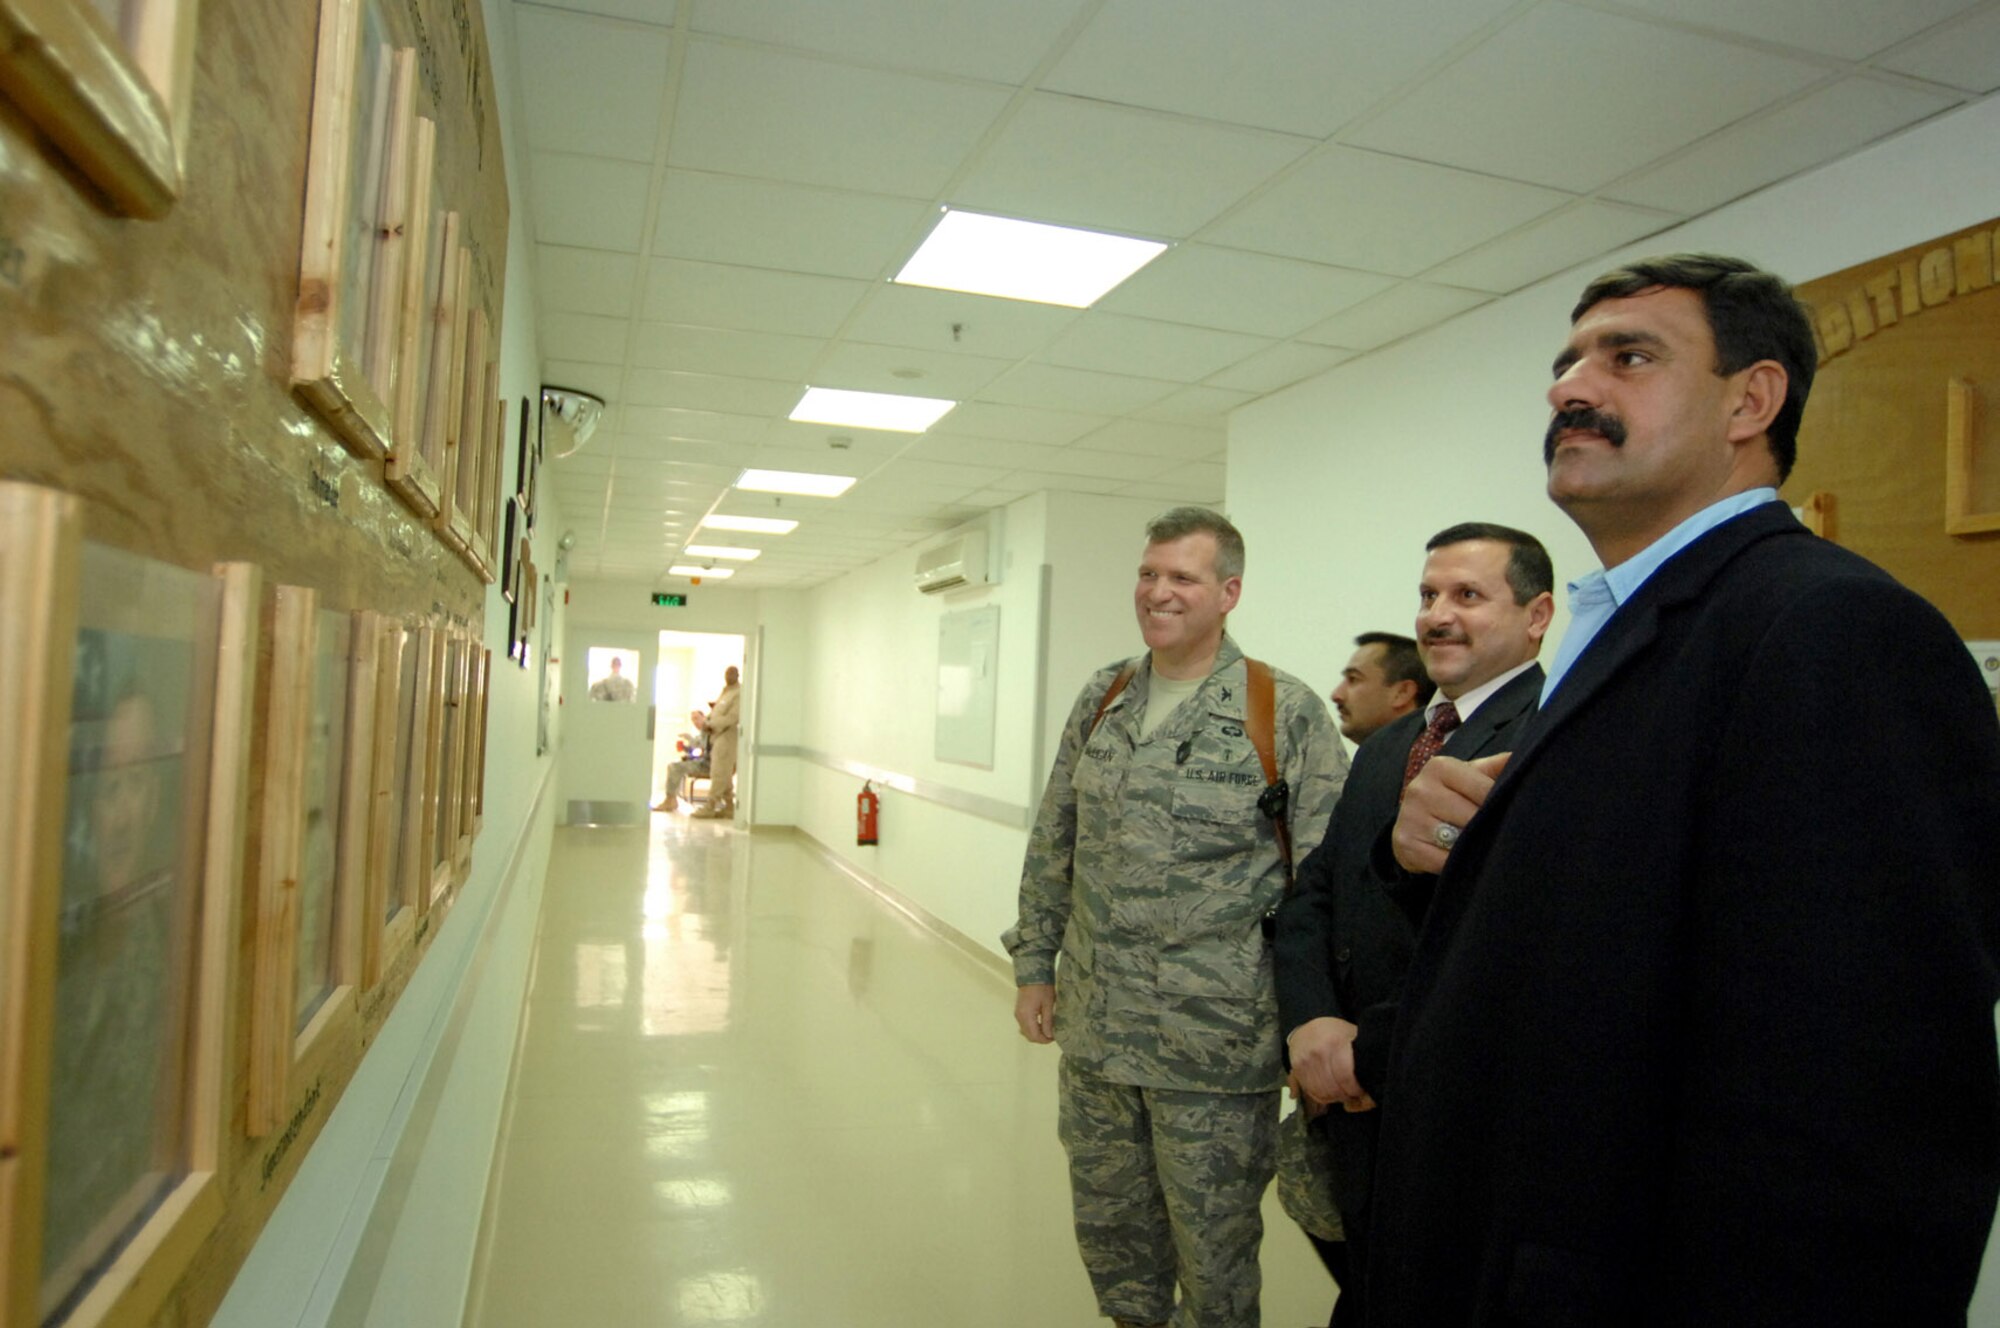 Local leaders from the city of Balad tour the Air Force Theater Hospital accompanied by Col. Timothy Halligan (left) Feb. 11 at Balad Air Base, Iraq. The men came to the hospital to visit Iraqi patients who were injured the previous day by a vehicle-borne improvised explosive device. Colonel Halligan is the 332nd Expeditionary Medical Group deputy commander and deployed from Lackland Air Force Base, Texas. (U.S. Air Force photo/Senior Airman Julianne Showalter) 
